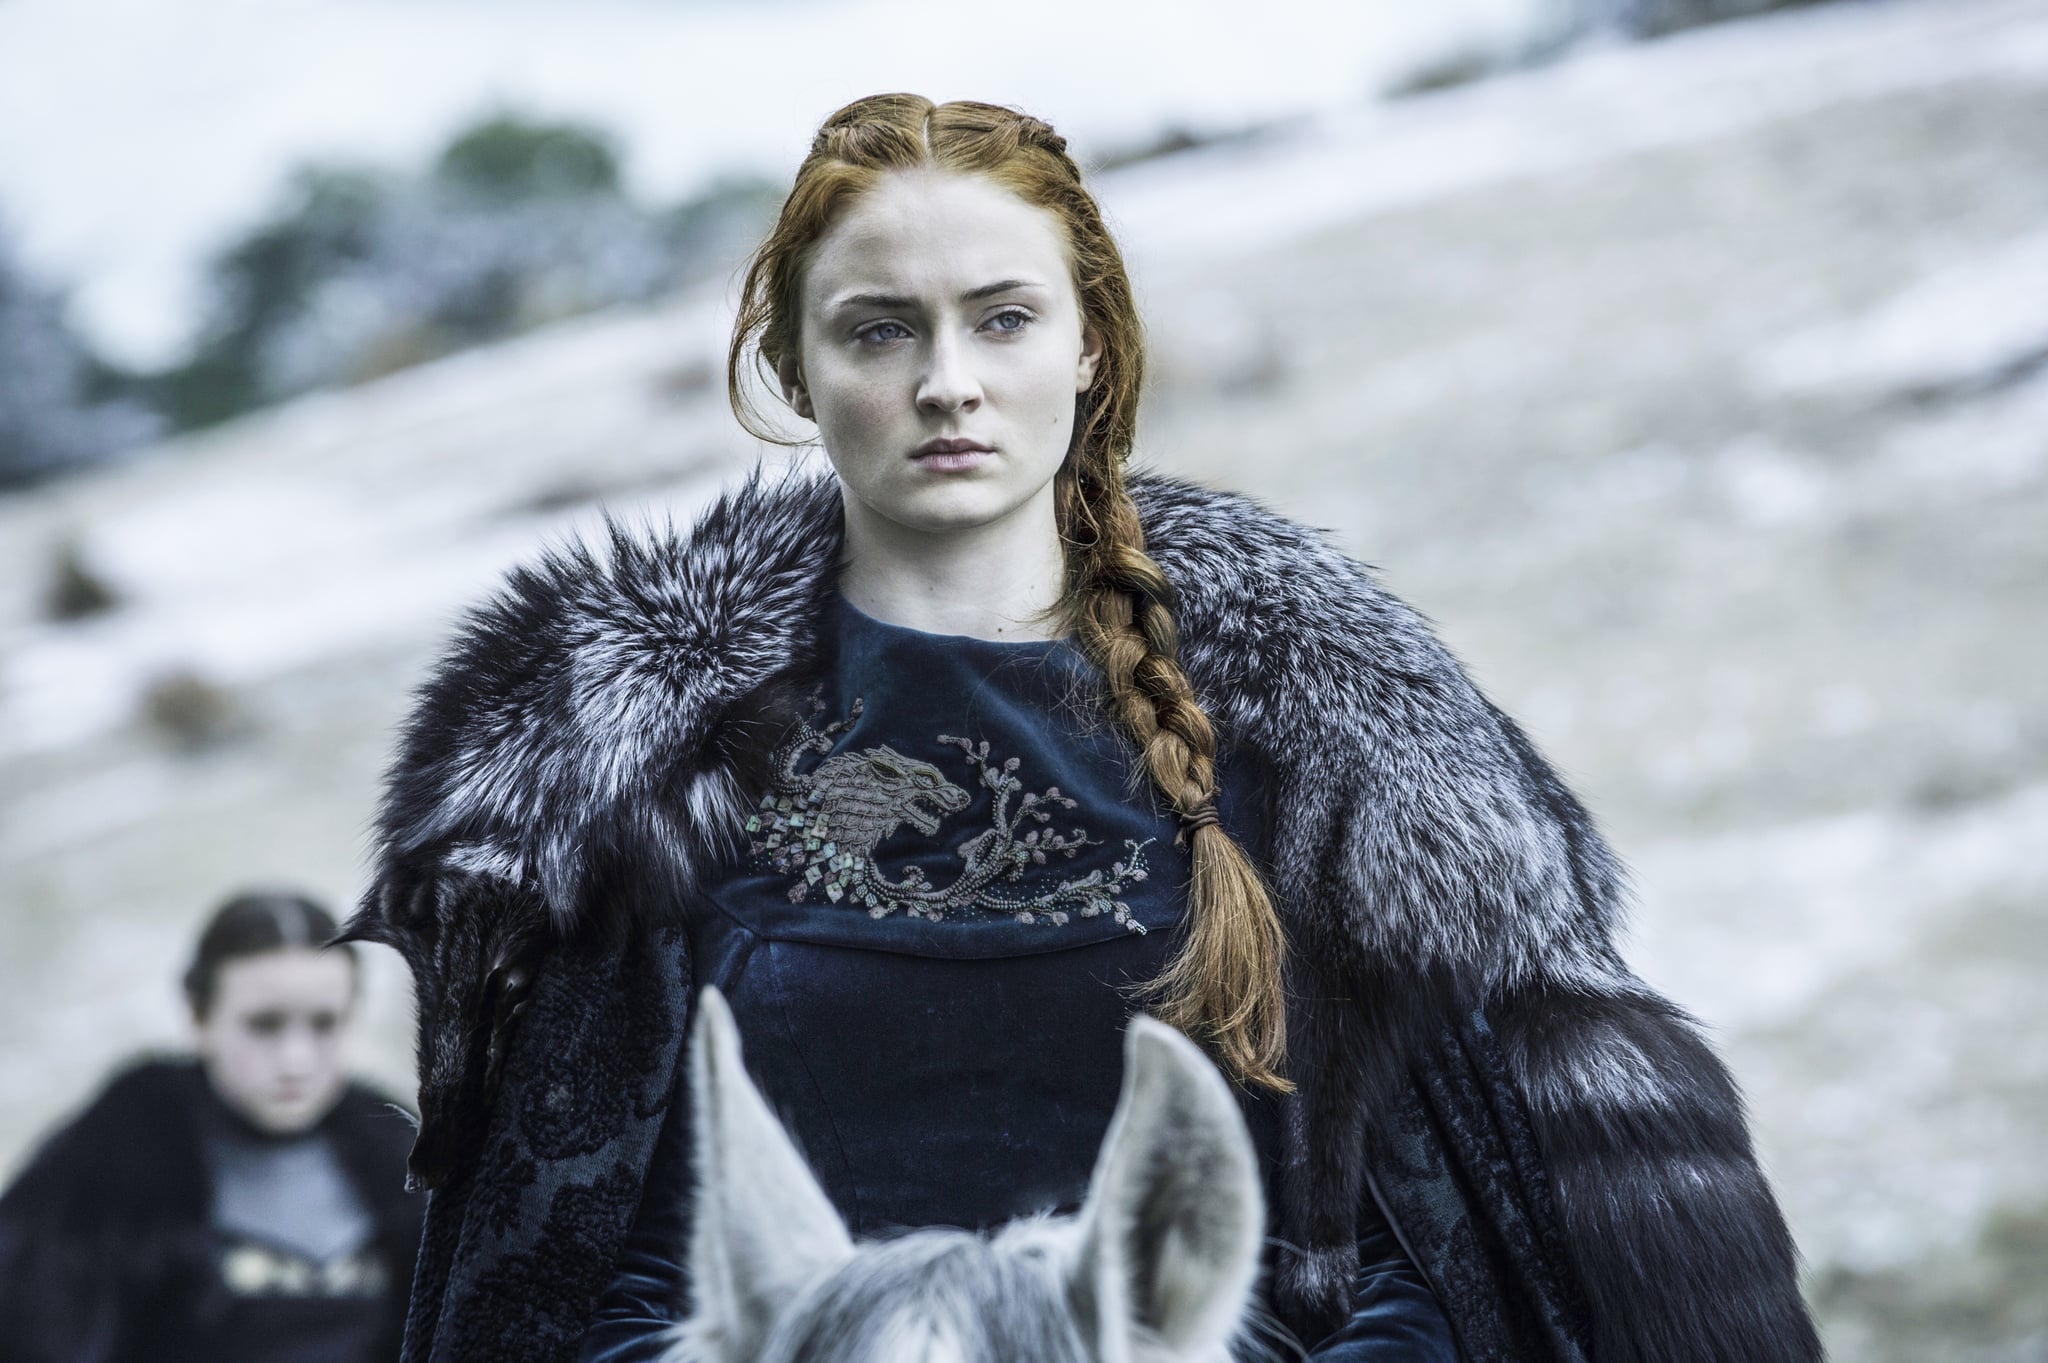 Is Sansa Stark Becoming Catelyn on Game of Thrones? | POPSUGAR Entertainment2048 x 1363